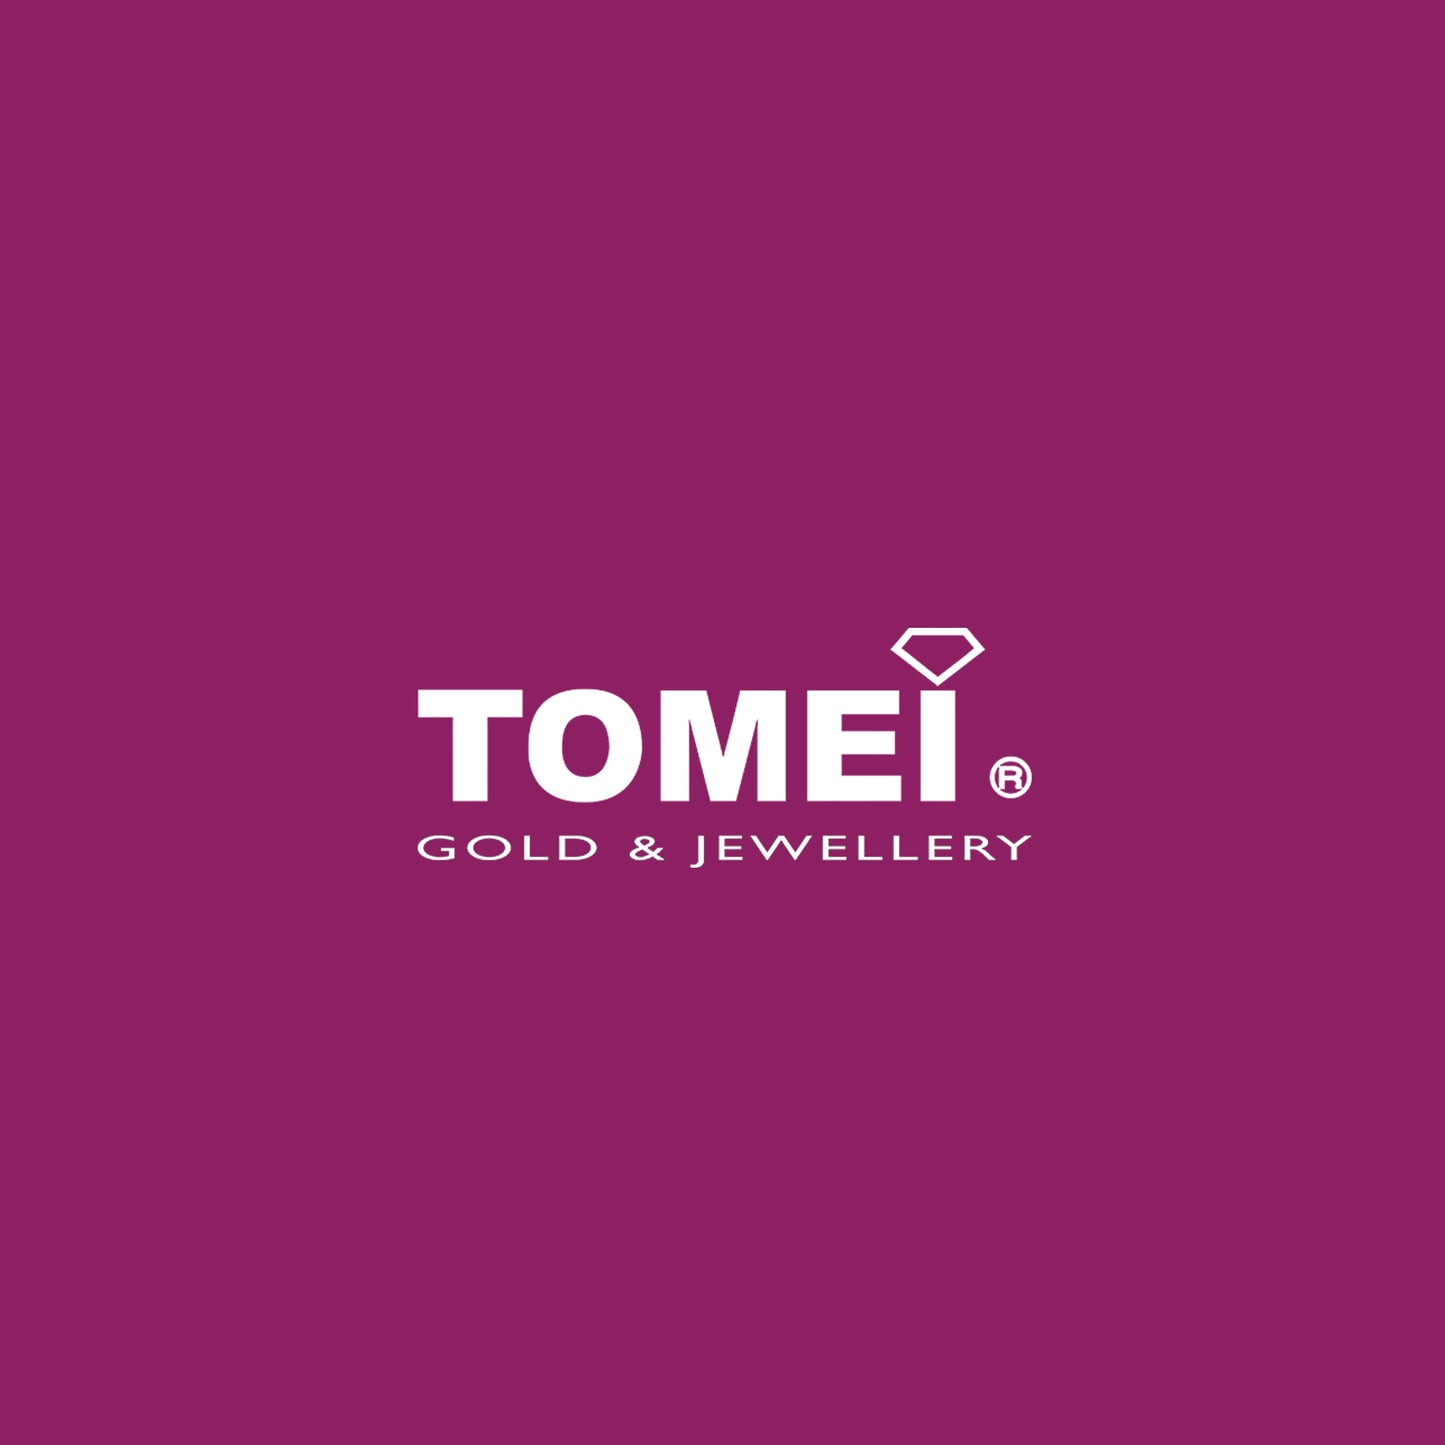 TOMEI Ring of Scintillescent Glamour, Diamond White Gold (R4019)